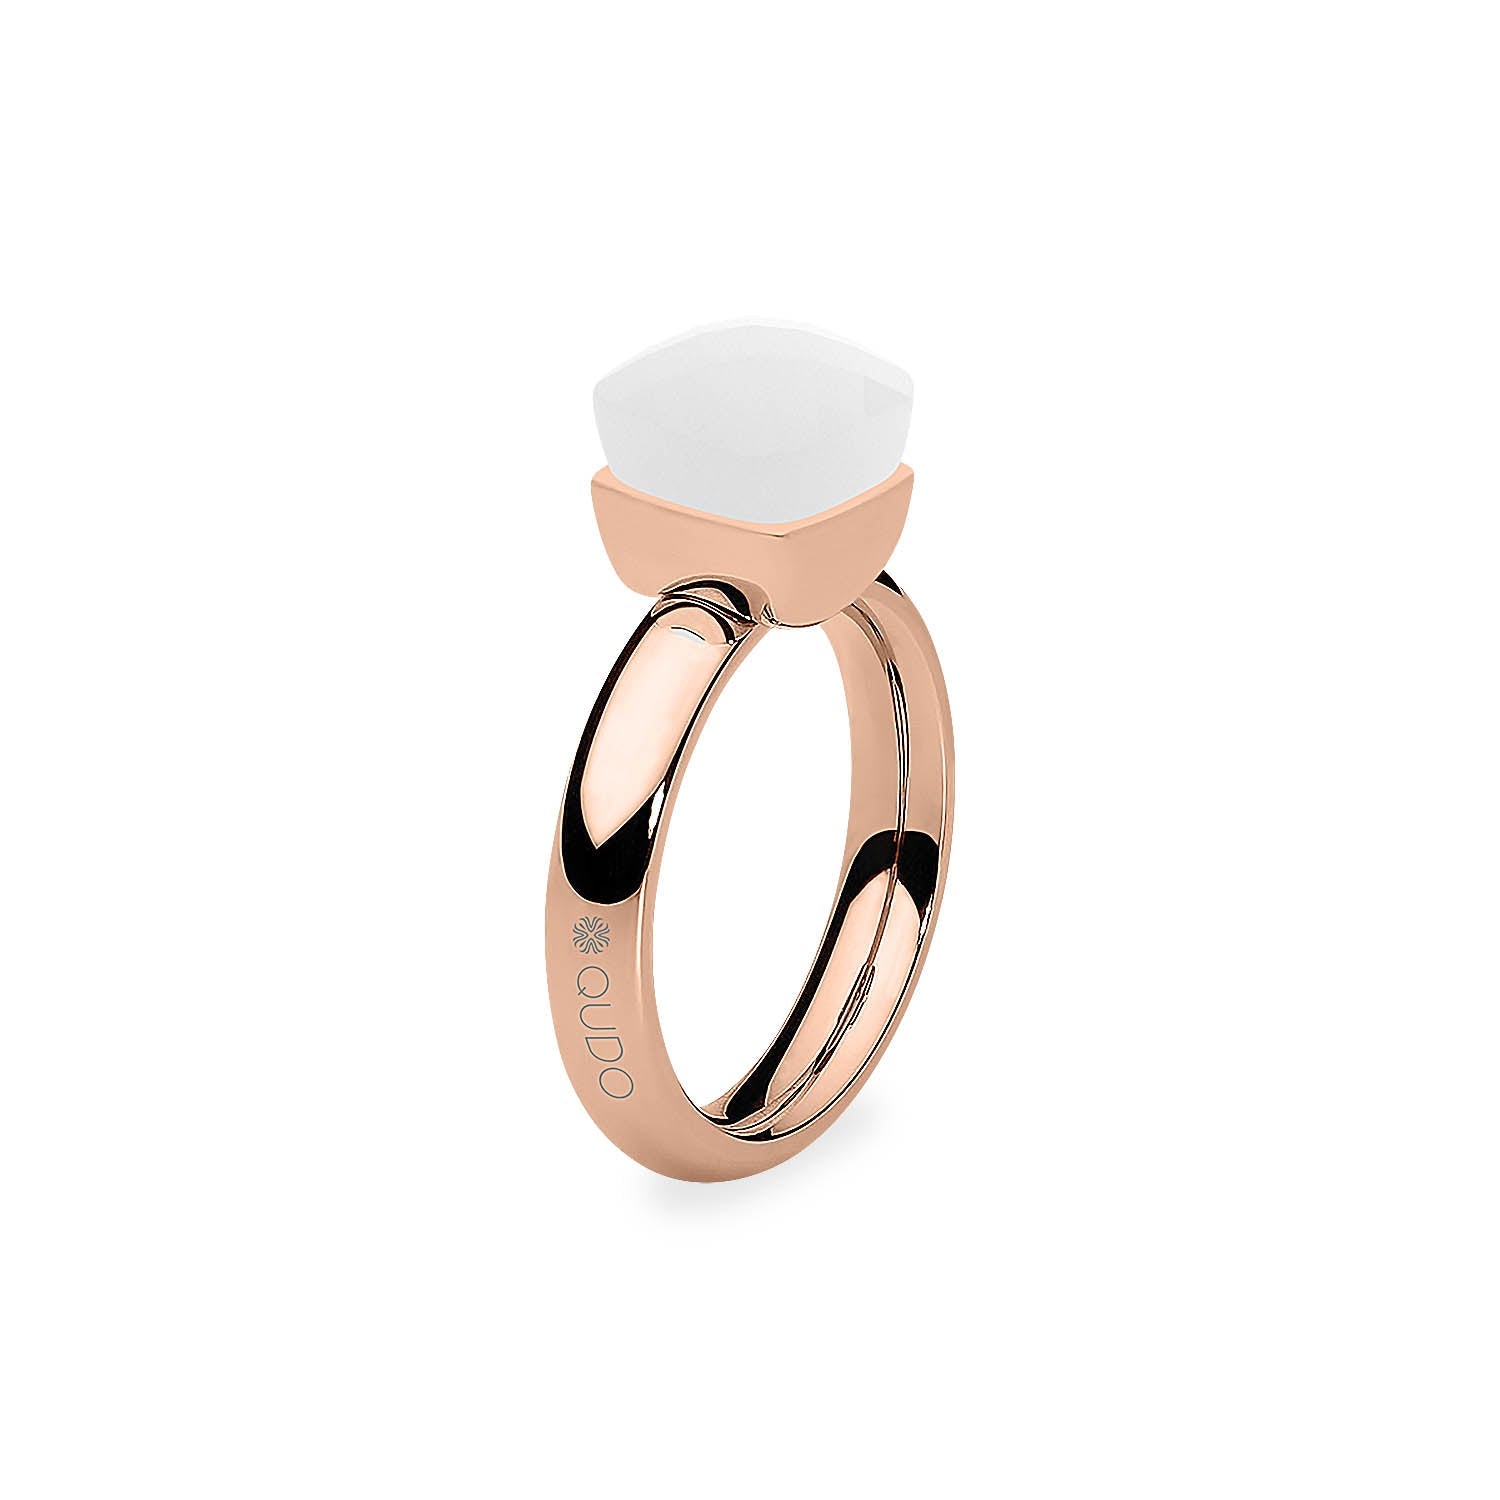 Firenze Ring - Shades of Blue - Rose Gold